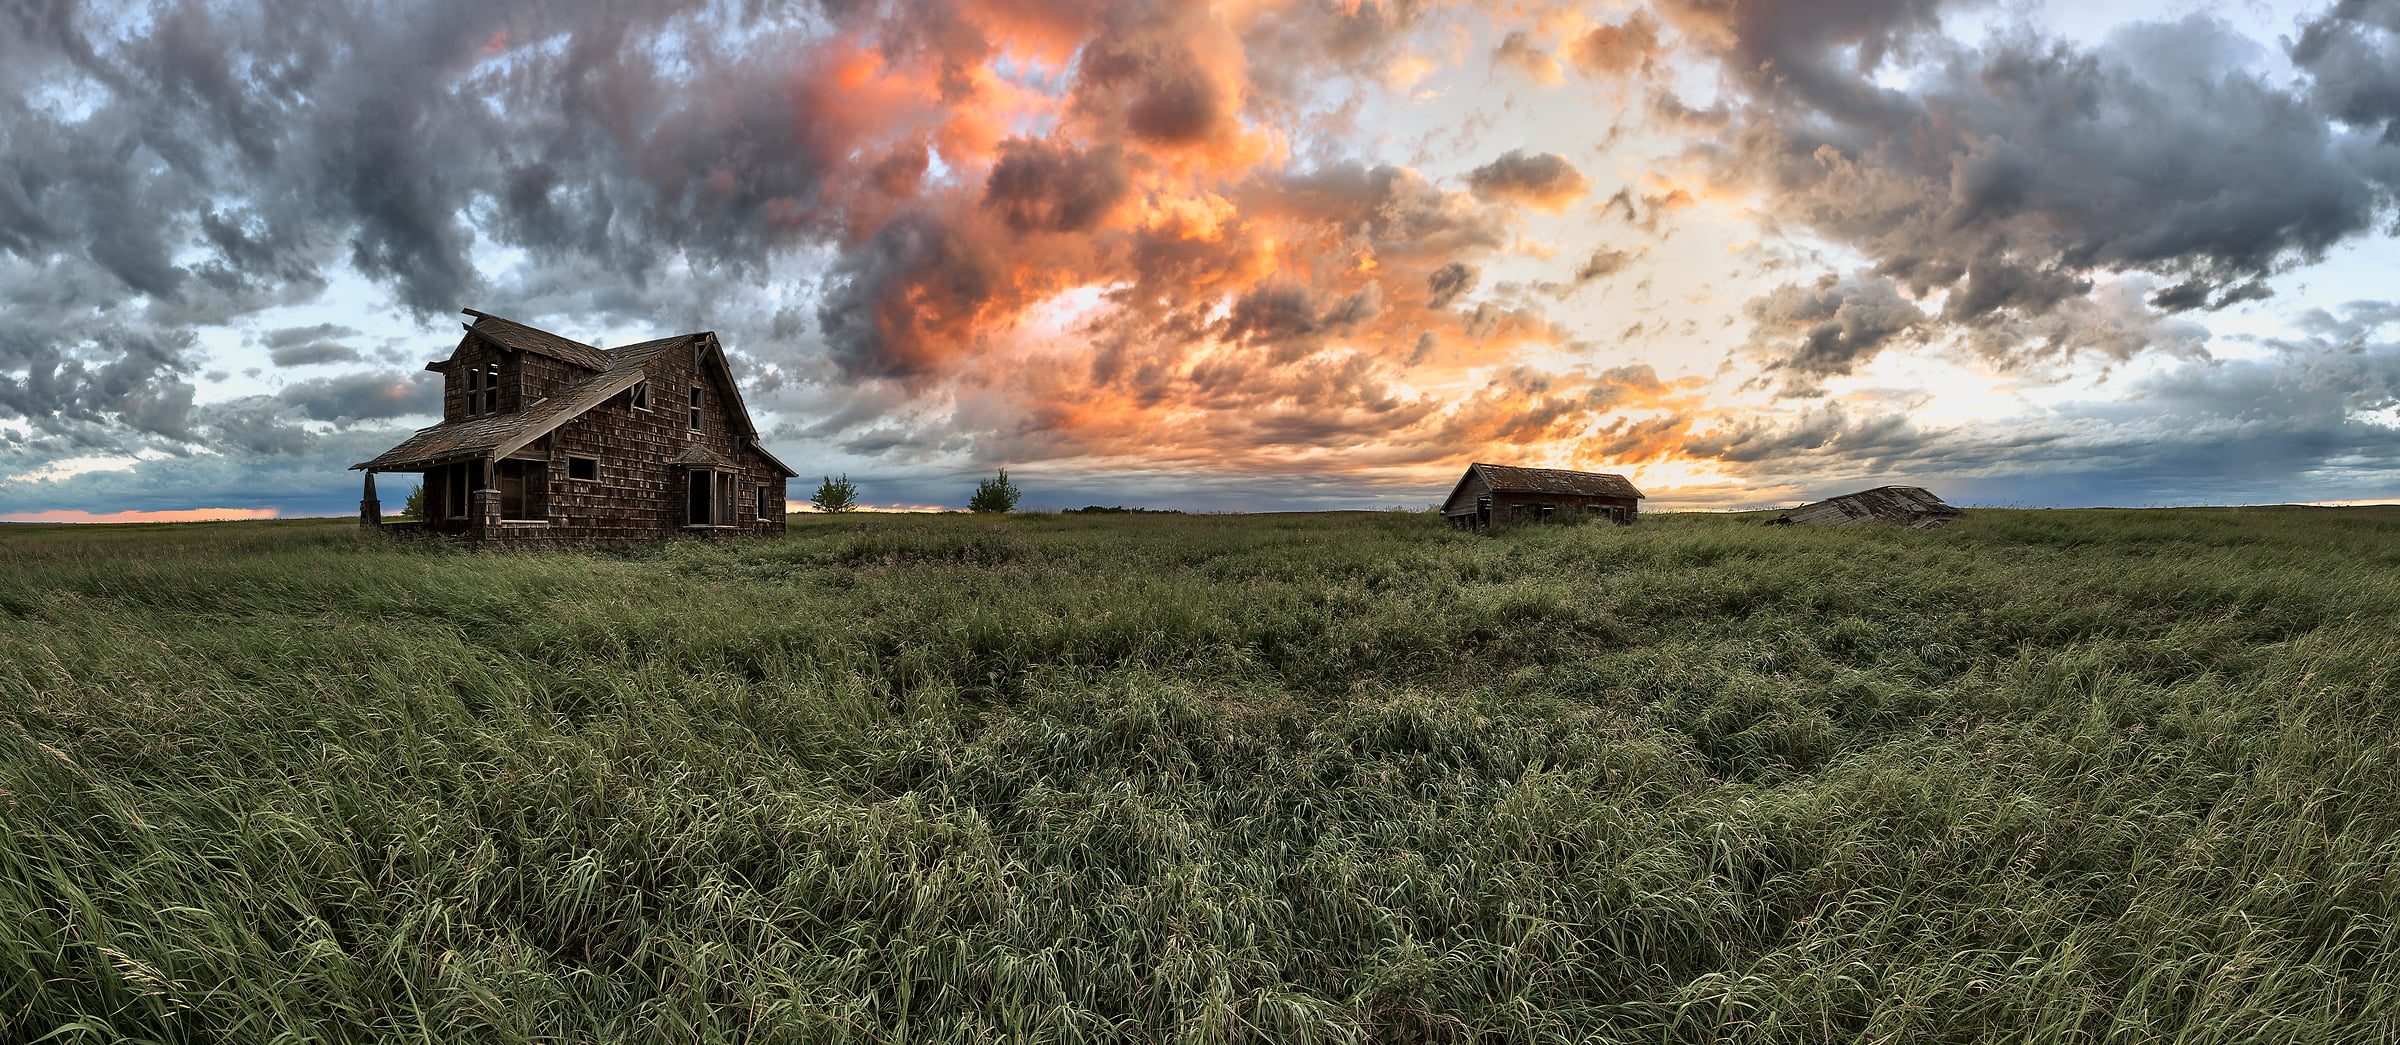 74 megapixels! A very high resolution, large-format VAST photo of farmland, grasslands, the prairie, and an old abandoned house; fine art landscape photo created at sunrise by Scott Dimond on the Great Plains in Alberta, Canada.